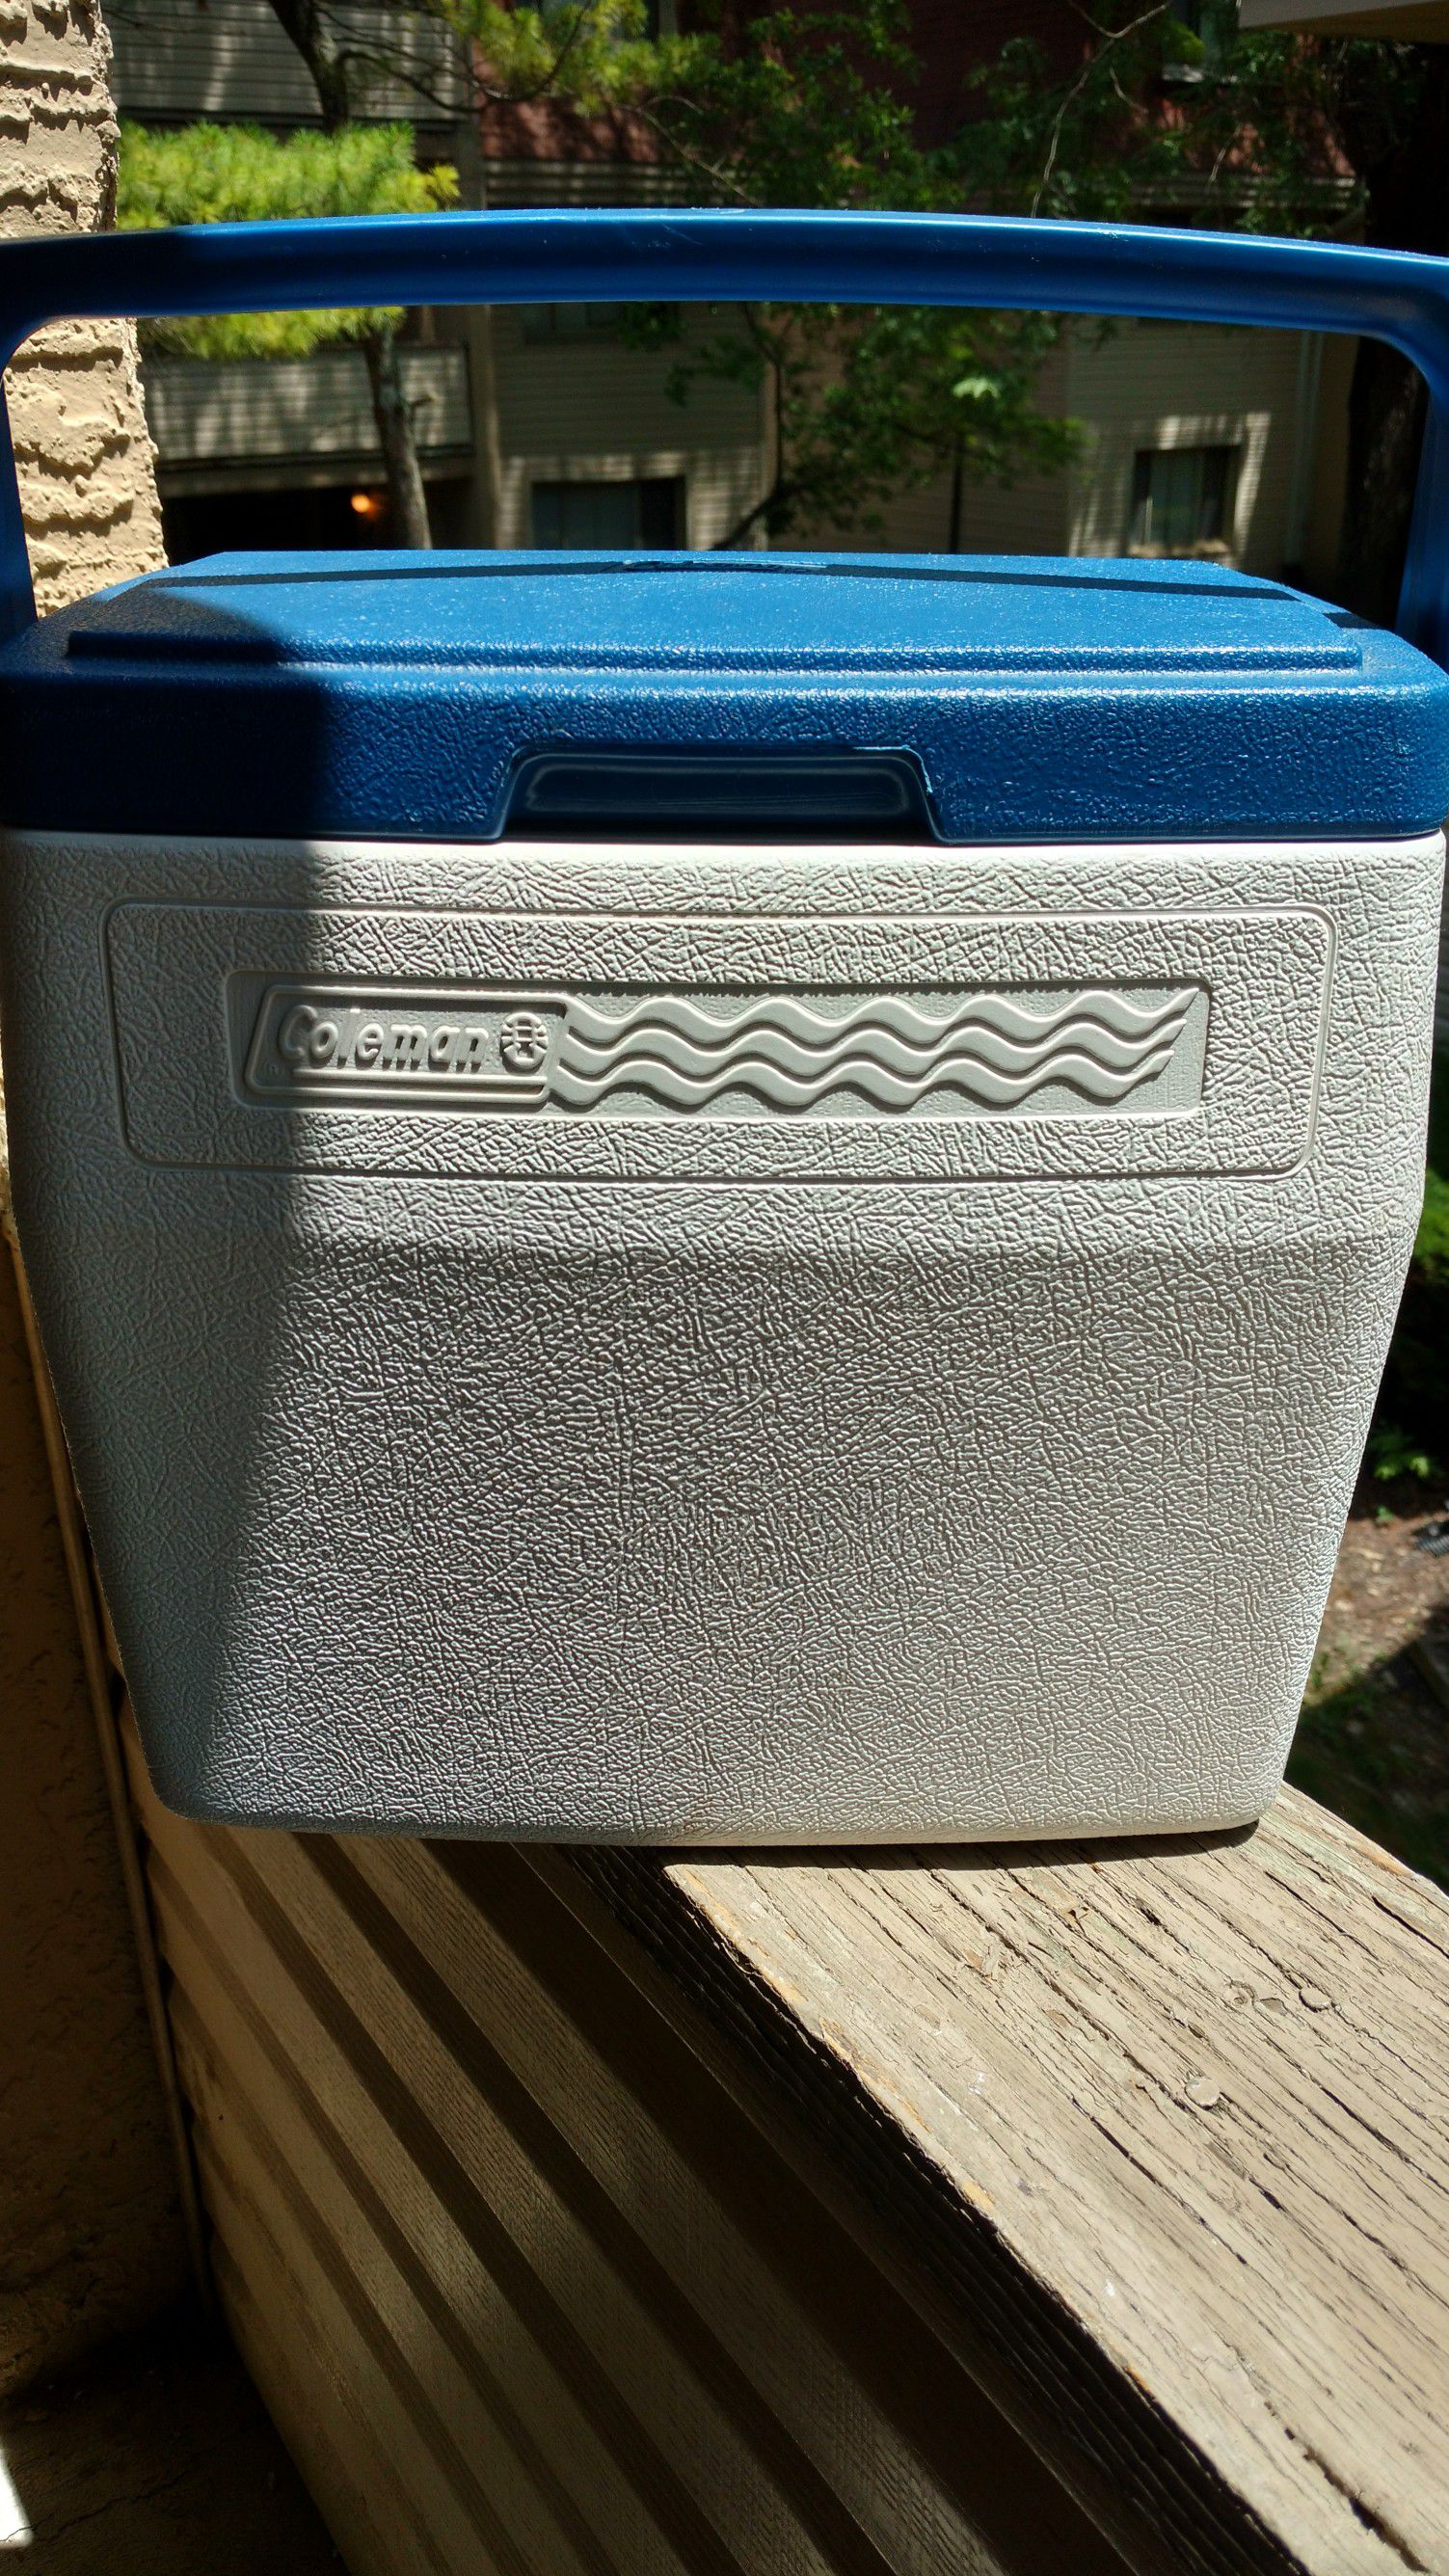 Coleman blue and white personal cooler